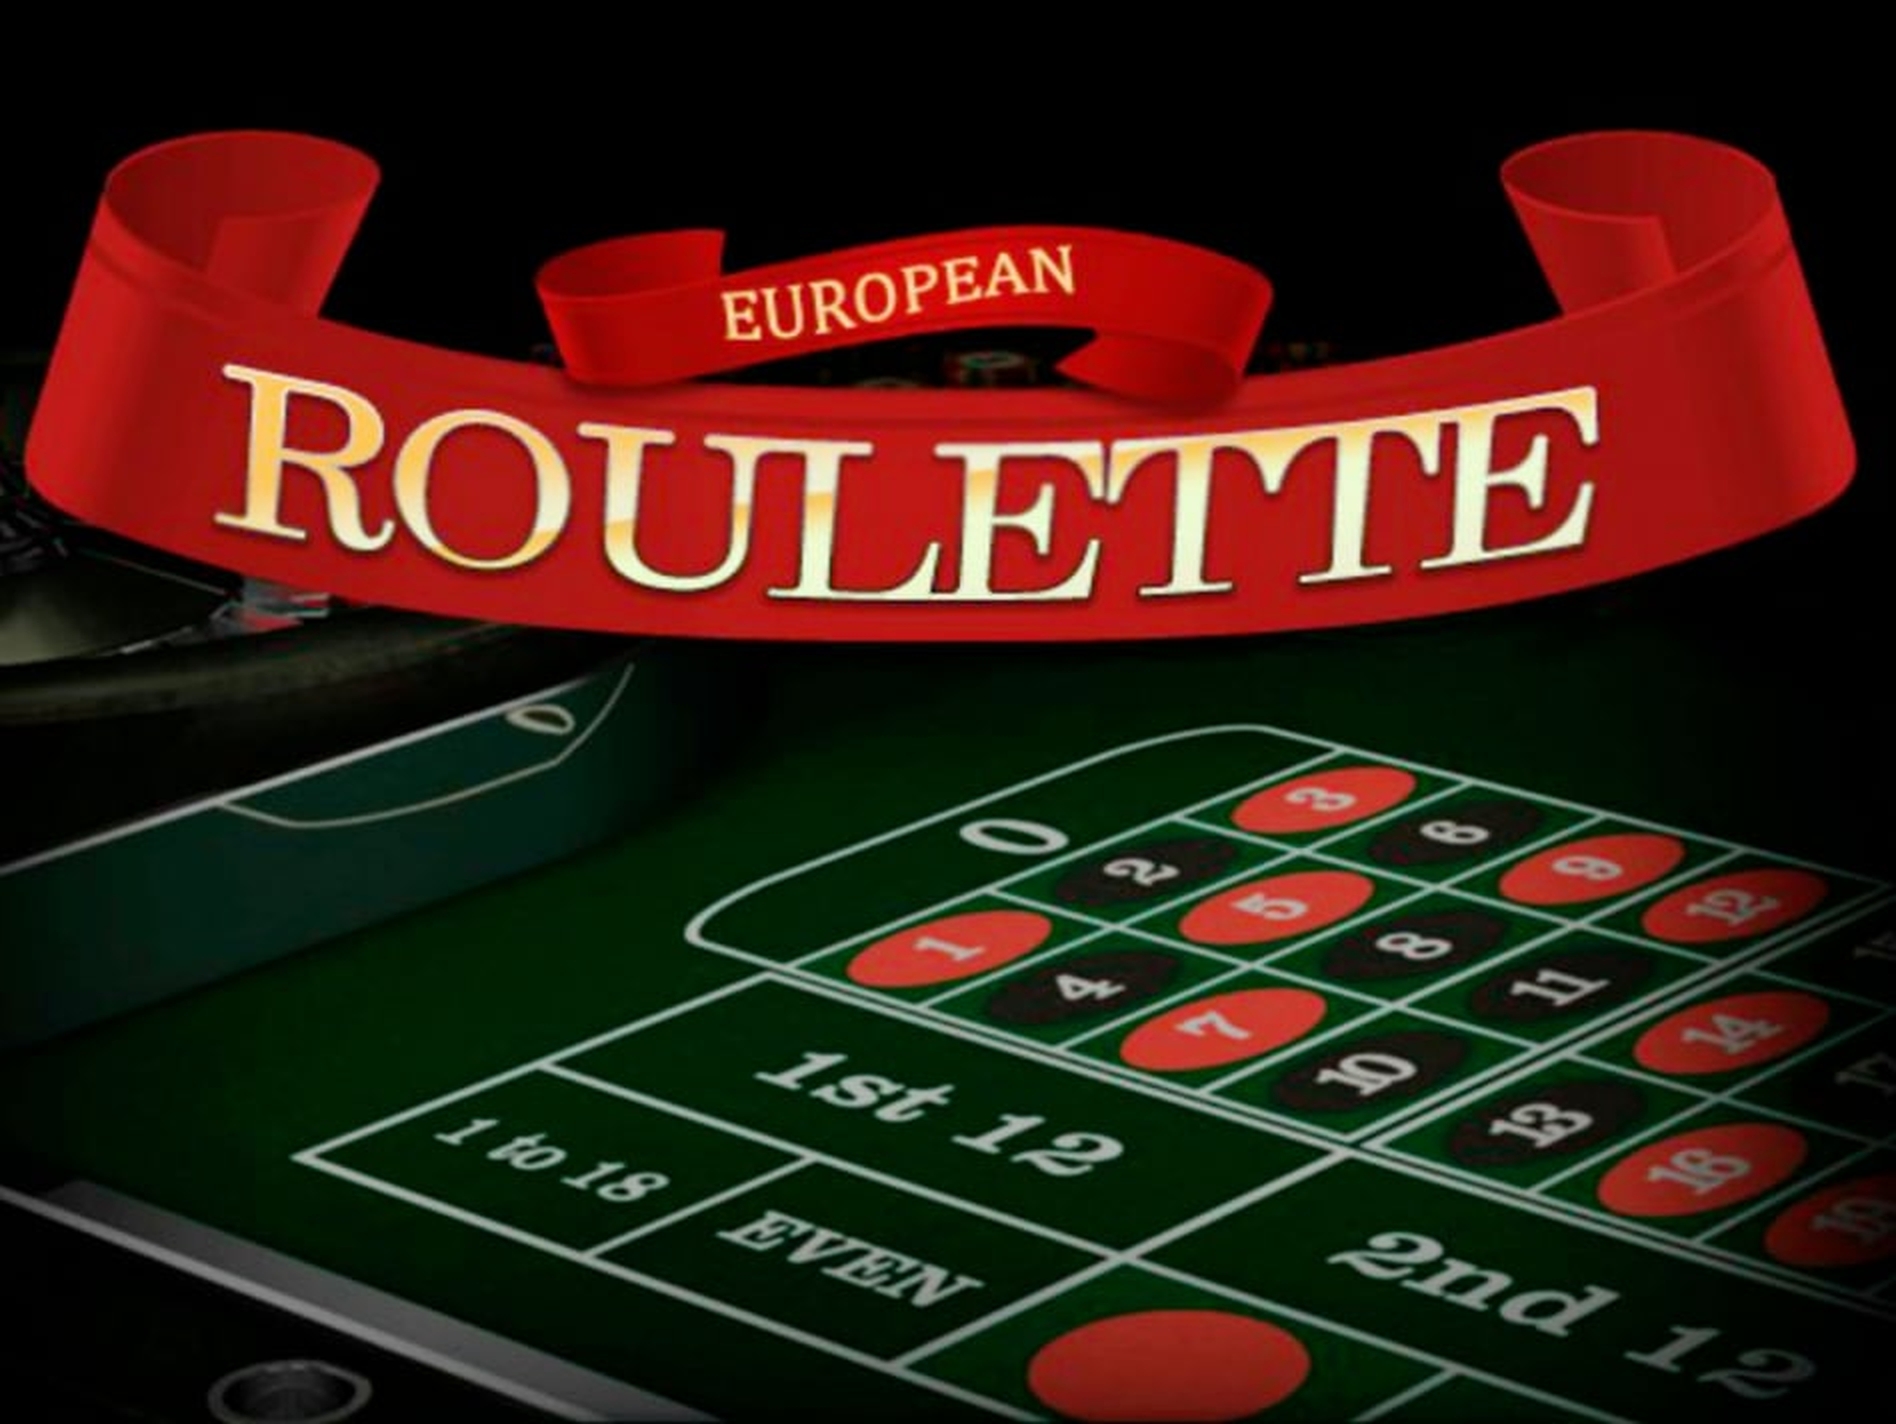 The European Roulette Online Slot Demo Game by Betsoft